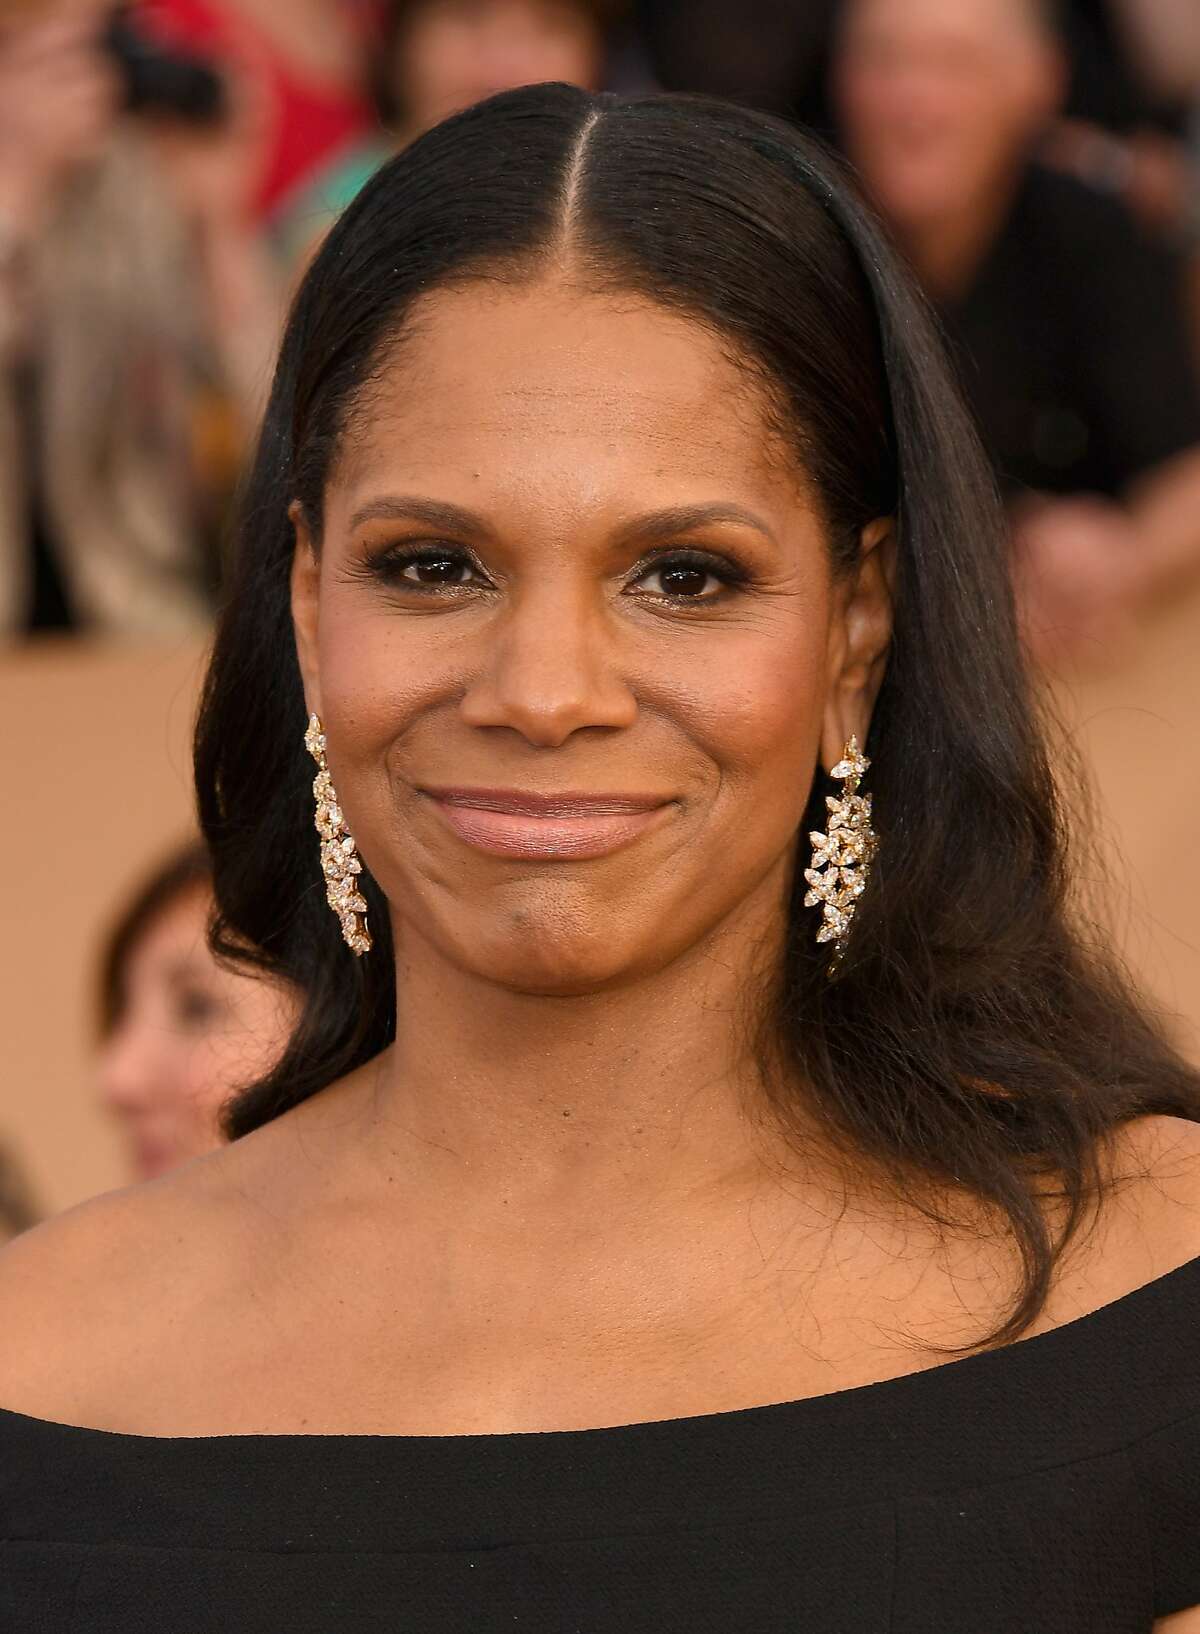 LOS ANGELES, CA - JANUARY 29: Actor Audra McDonald attends the 23rd Annual Screen Actors Guild Awards at The Shrine Expo Hall on January 29, 2017 in Los Angeles, California. (Photo by Alberto E. Rodriguez/Getty Images)